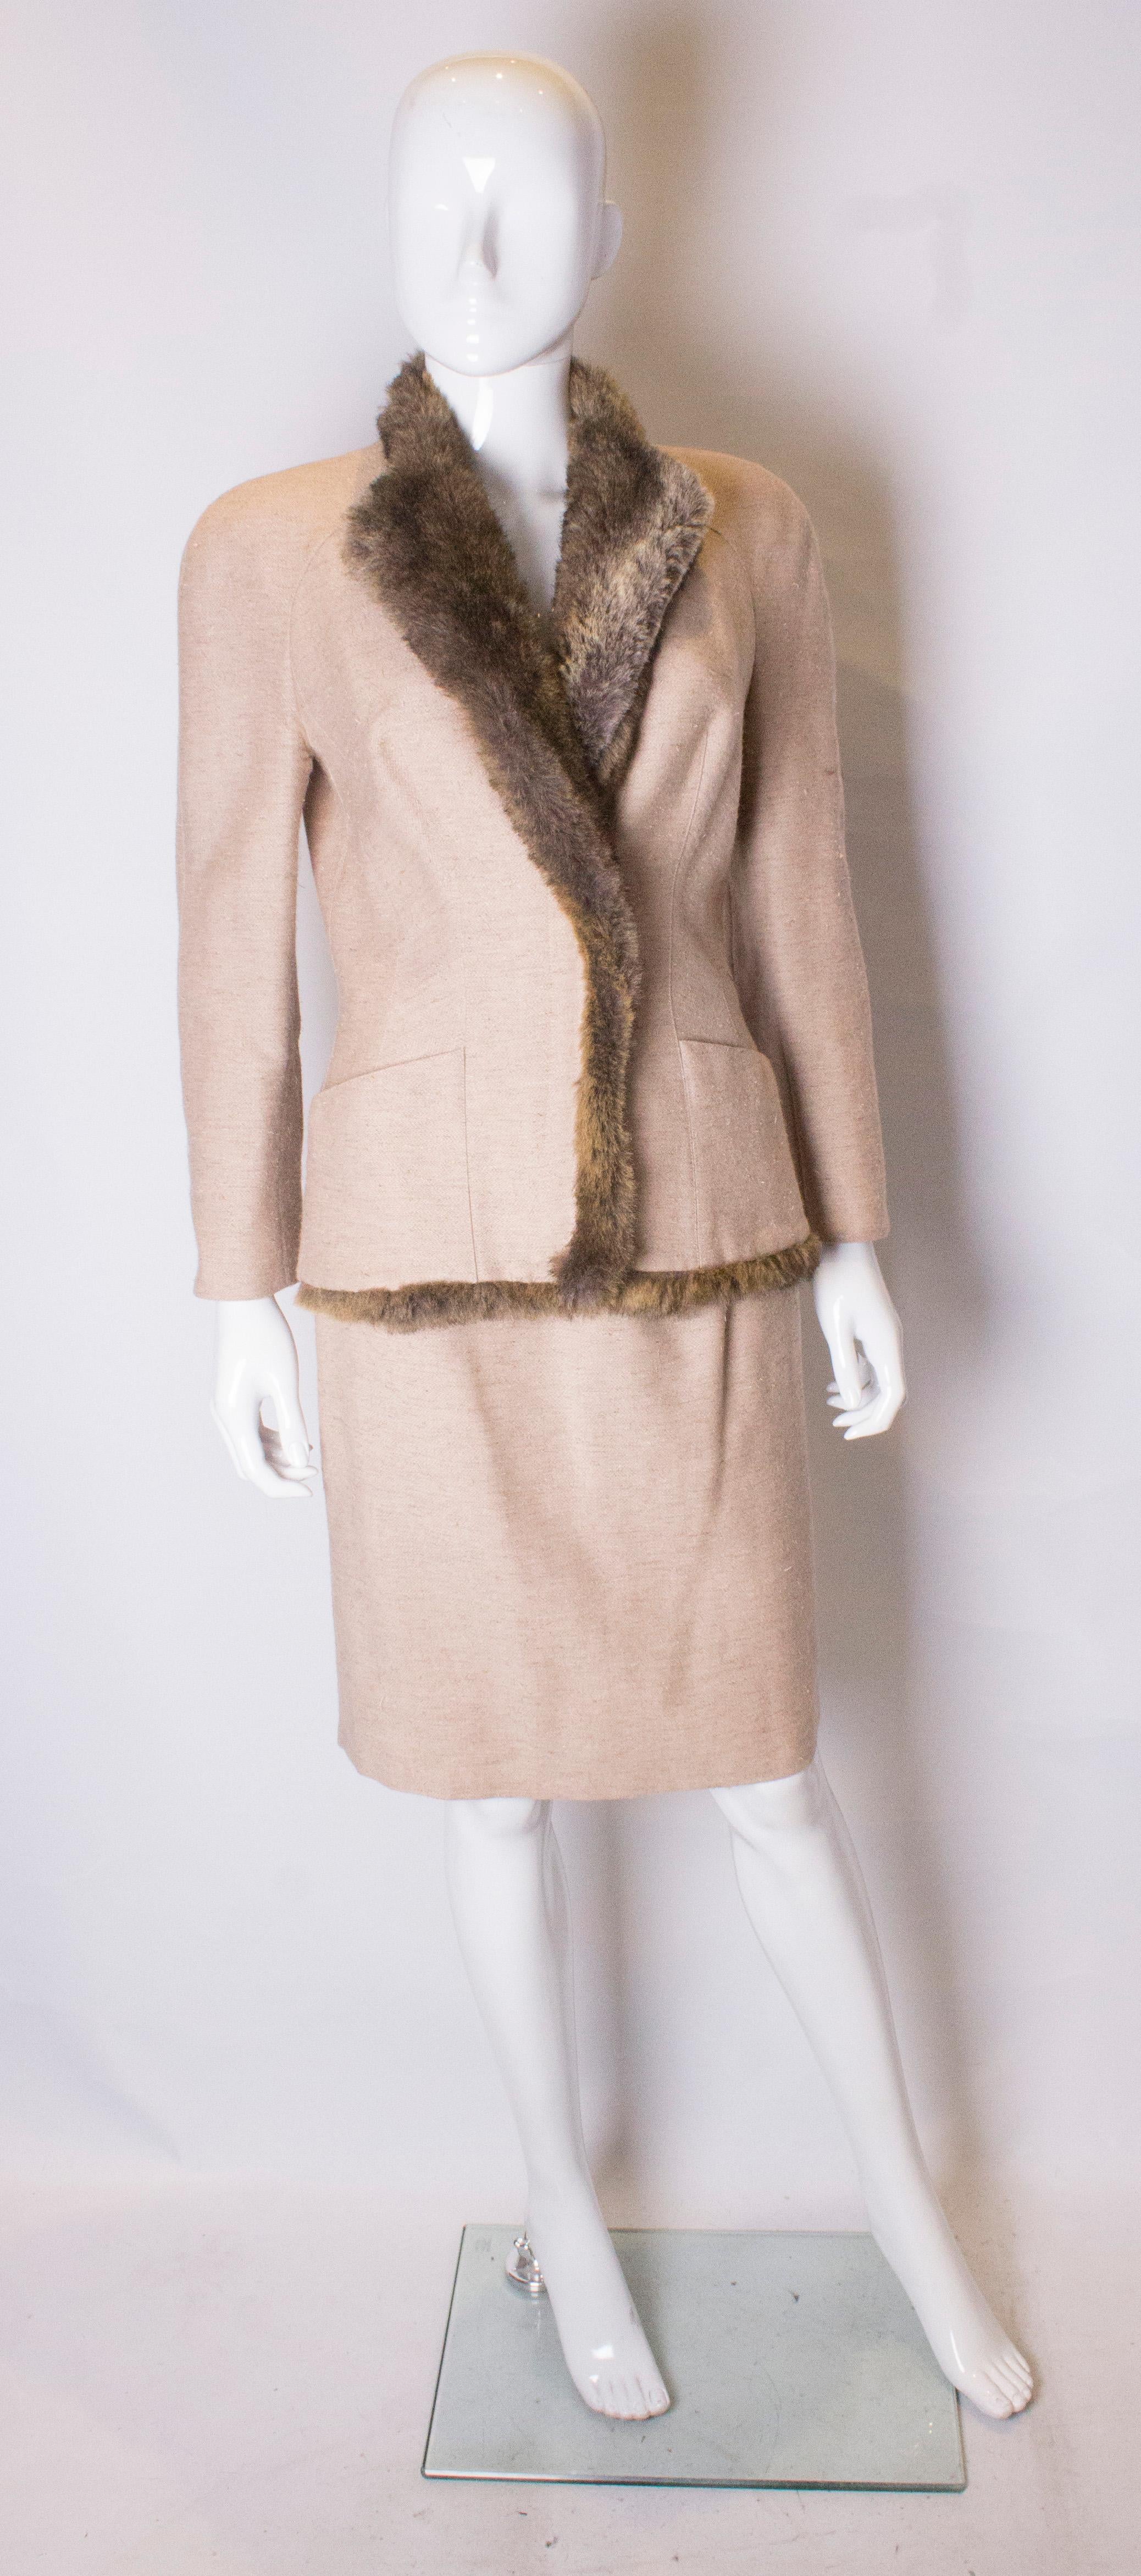 A chic vintage skirt suit by Mugler. The suit is made of an attractive biscuit colour wool with faux fur decoration.  The jacket has two pockets on the front and faux fur collar and trim along the front and front of the jacket hem. Both the jacket